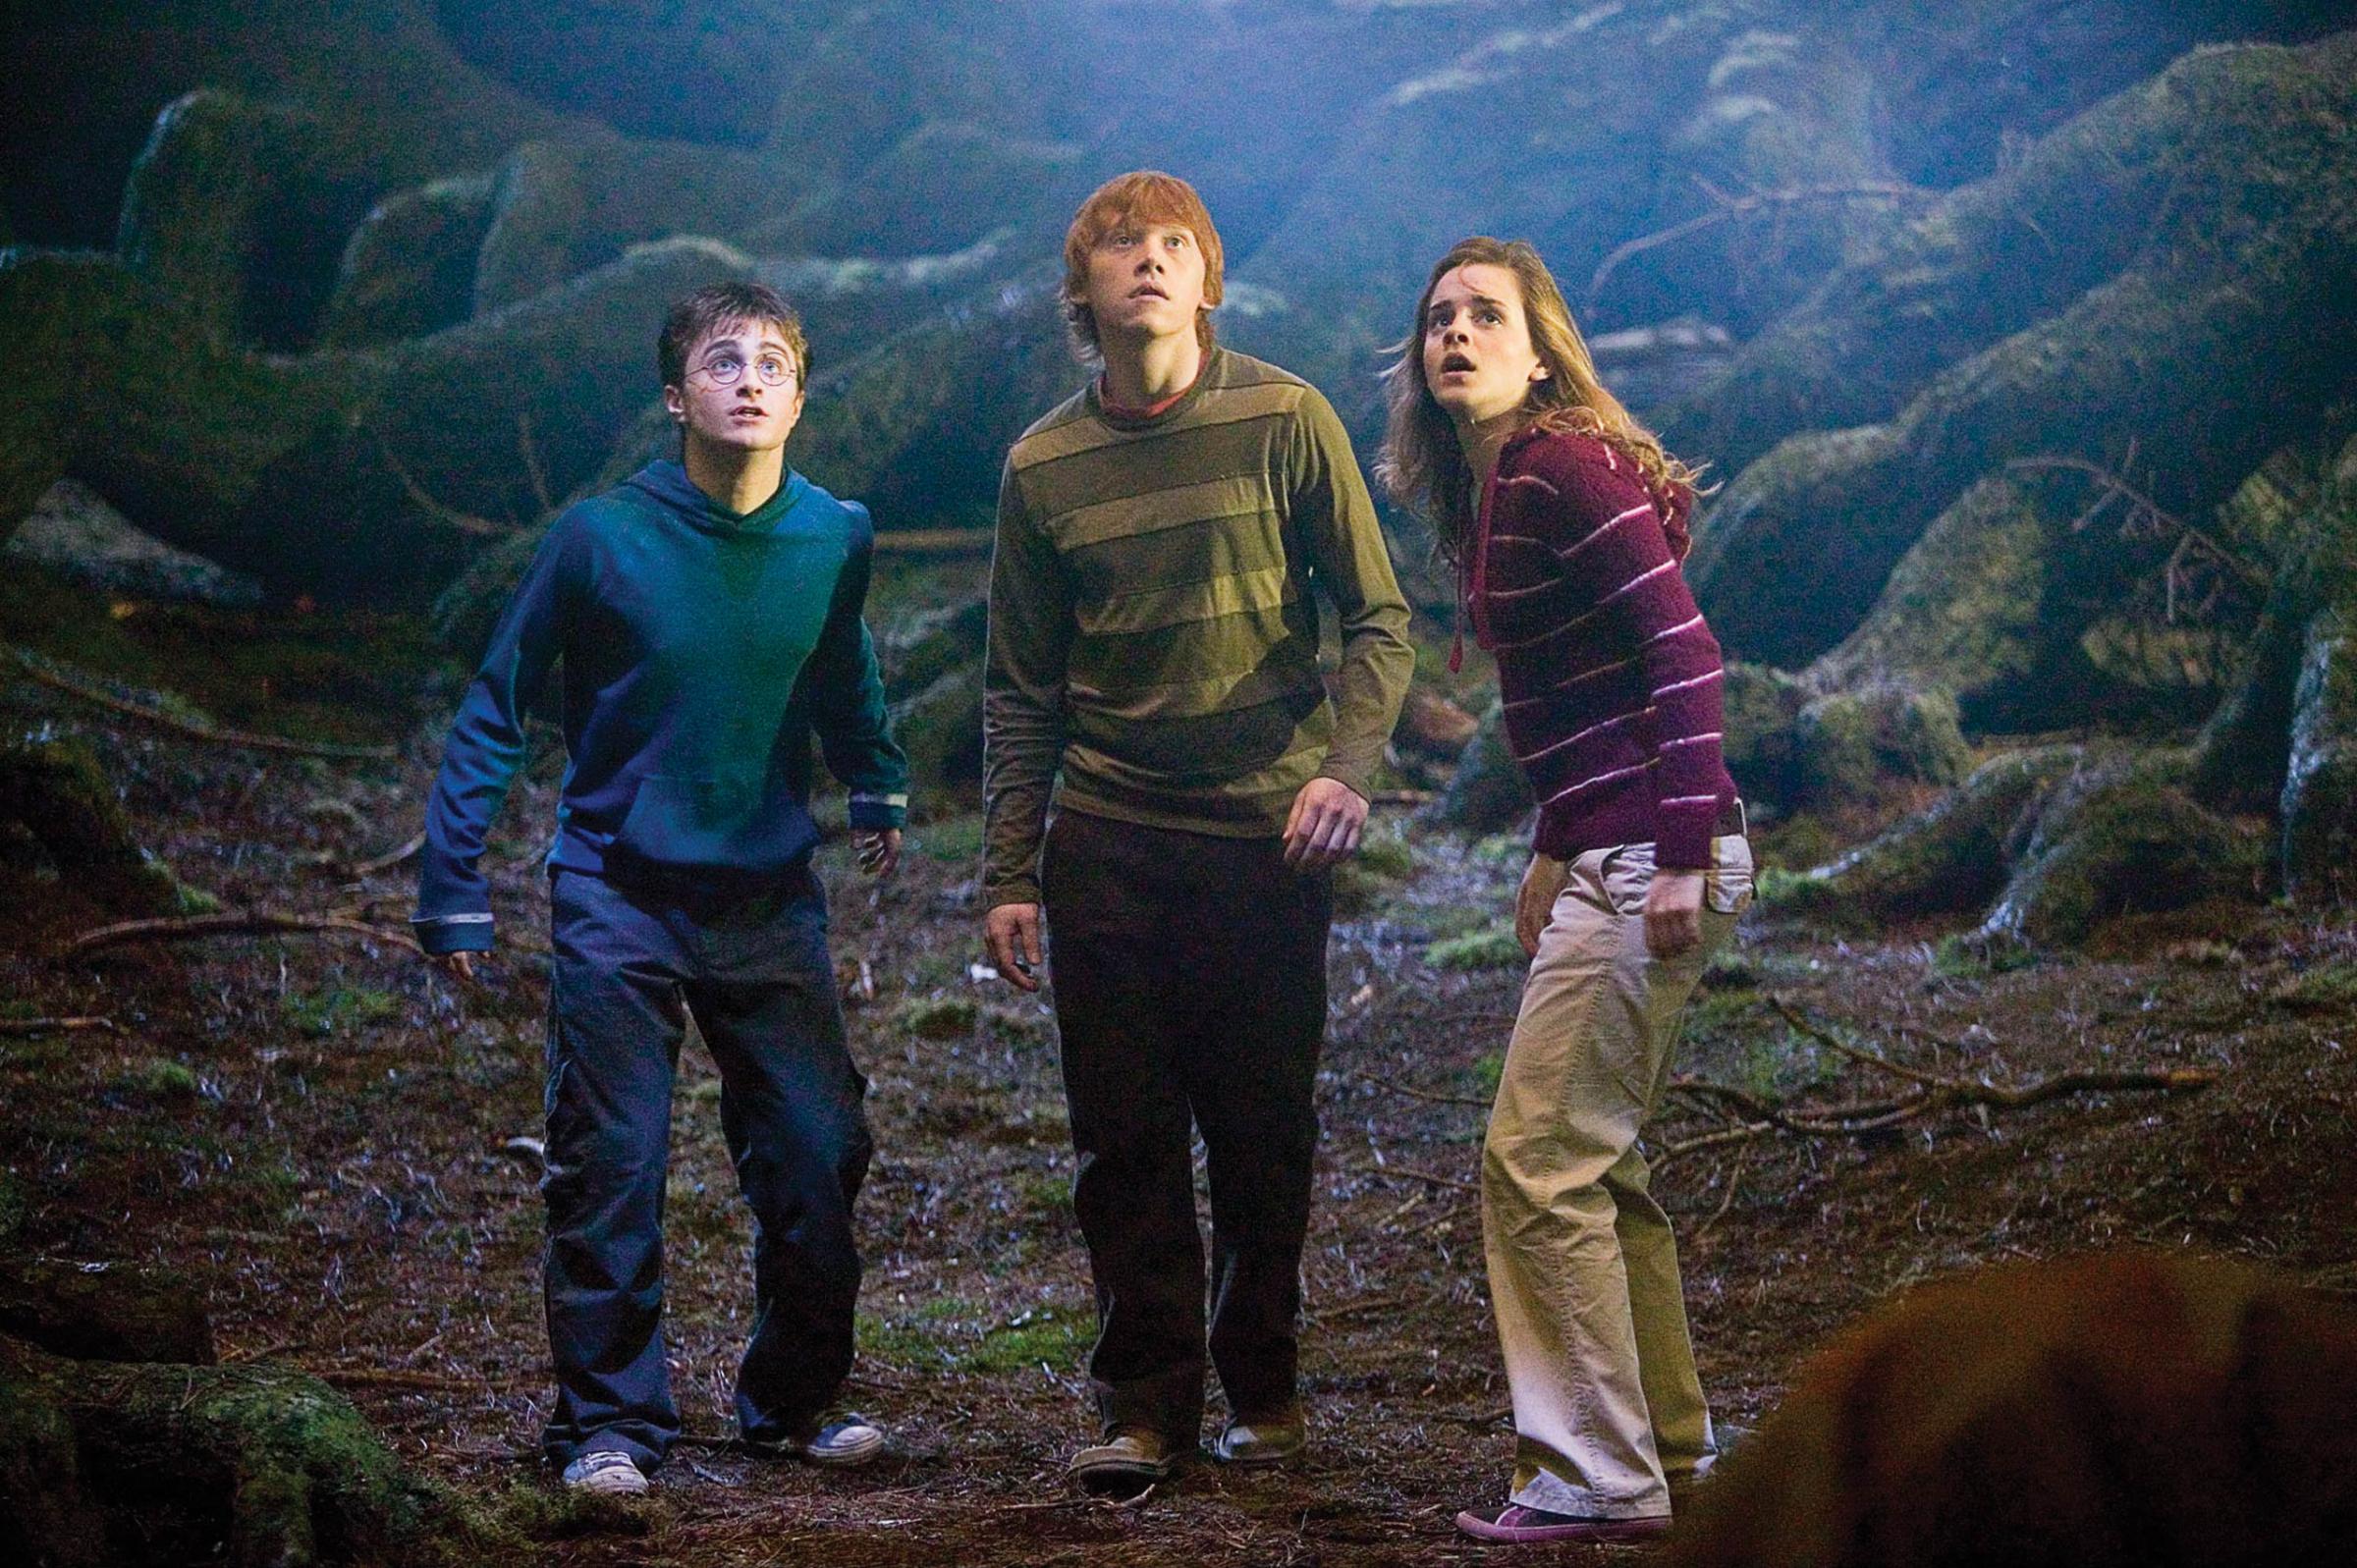 (L-r) DANIEL RADCLIFFE as Harry Potter, RUPERT GRINT as Ron Weasley and EMMA WATSON as Hermione Granger in Warner Bros. Pictures' fantasy "Harry Potter and the Order of the Phoenix." PHOTOGRAPHS TO BE USED SOLELY FOR ADVERTISING, PROMOTION, PUBLICITY OR REVIEWS OF THIS SPECIFIC MOTION PICTURE AND TO REMAIN THE PROPERTY OF THE STUDIO. NOT FOR SALE OR REDISTRIBUTION